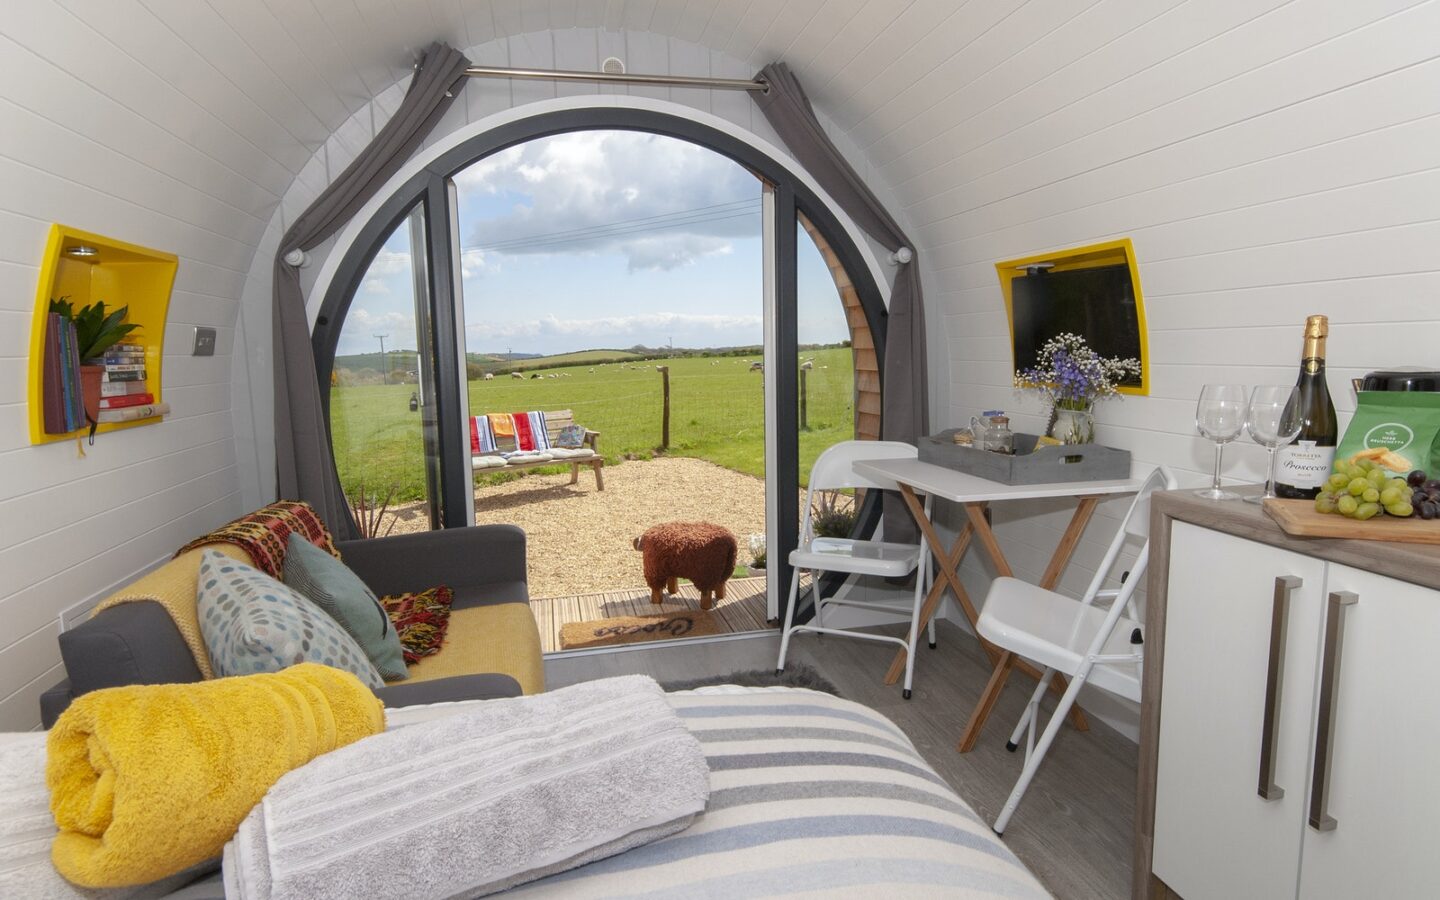 Glamping in Wales with hot tub, Hafan Fach Glamping Pod inside